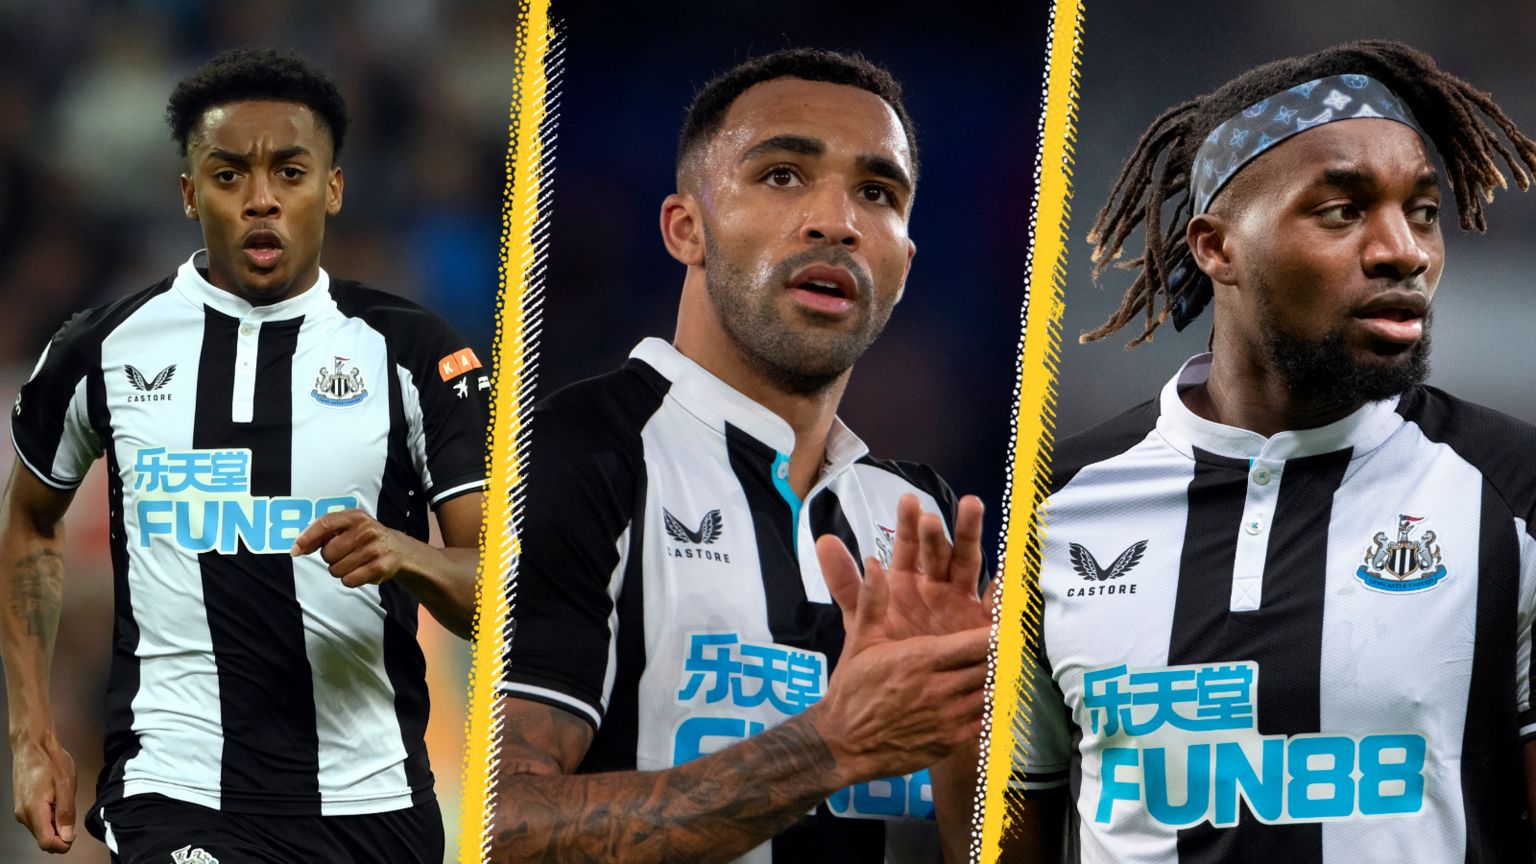 Newcastle United's three best players so far as chosen by you BBC Sport